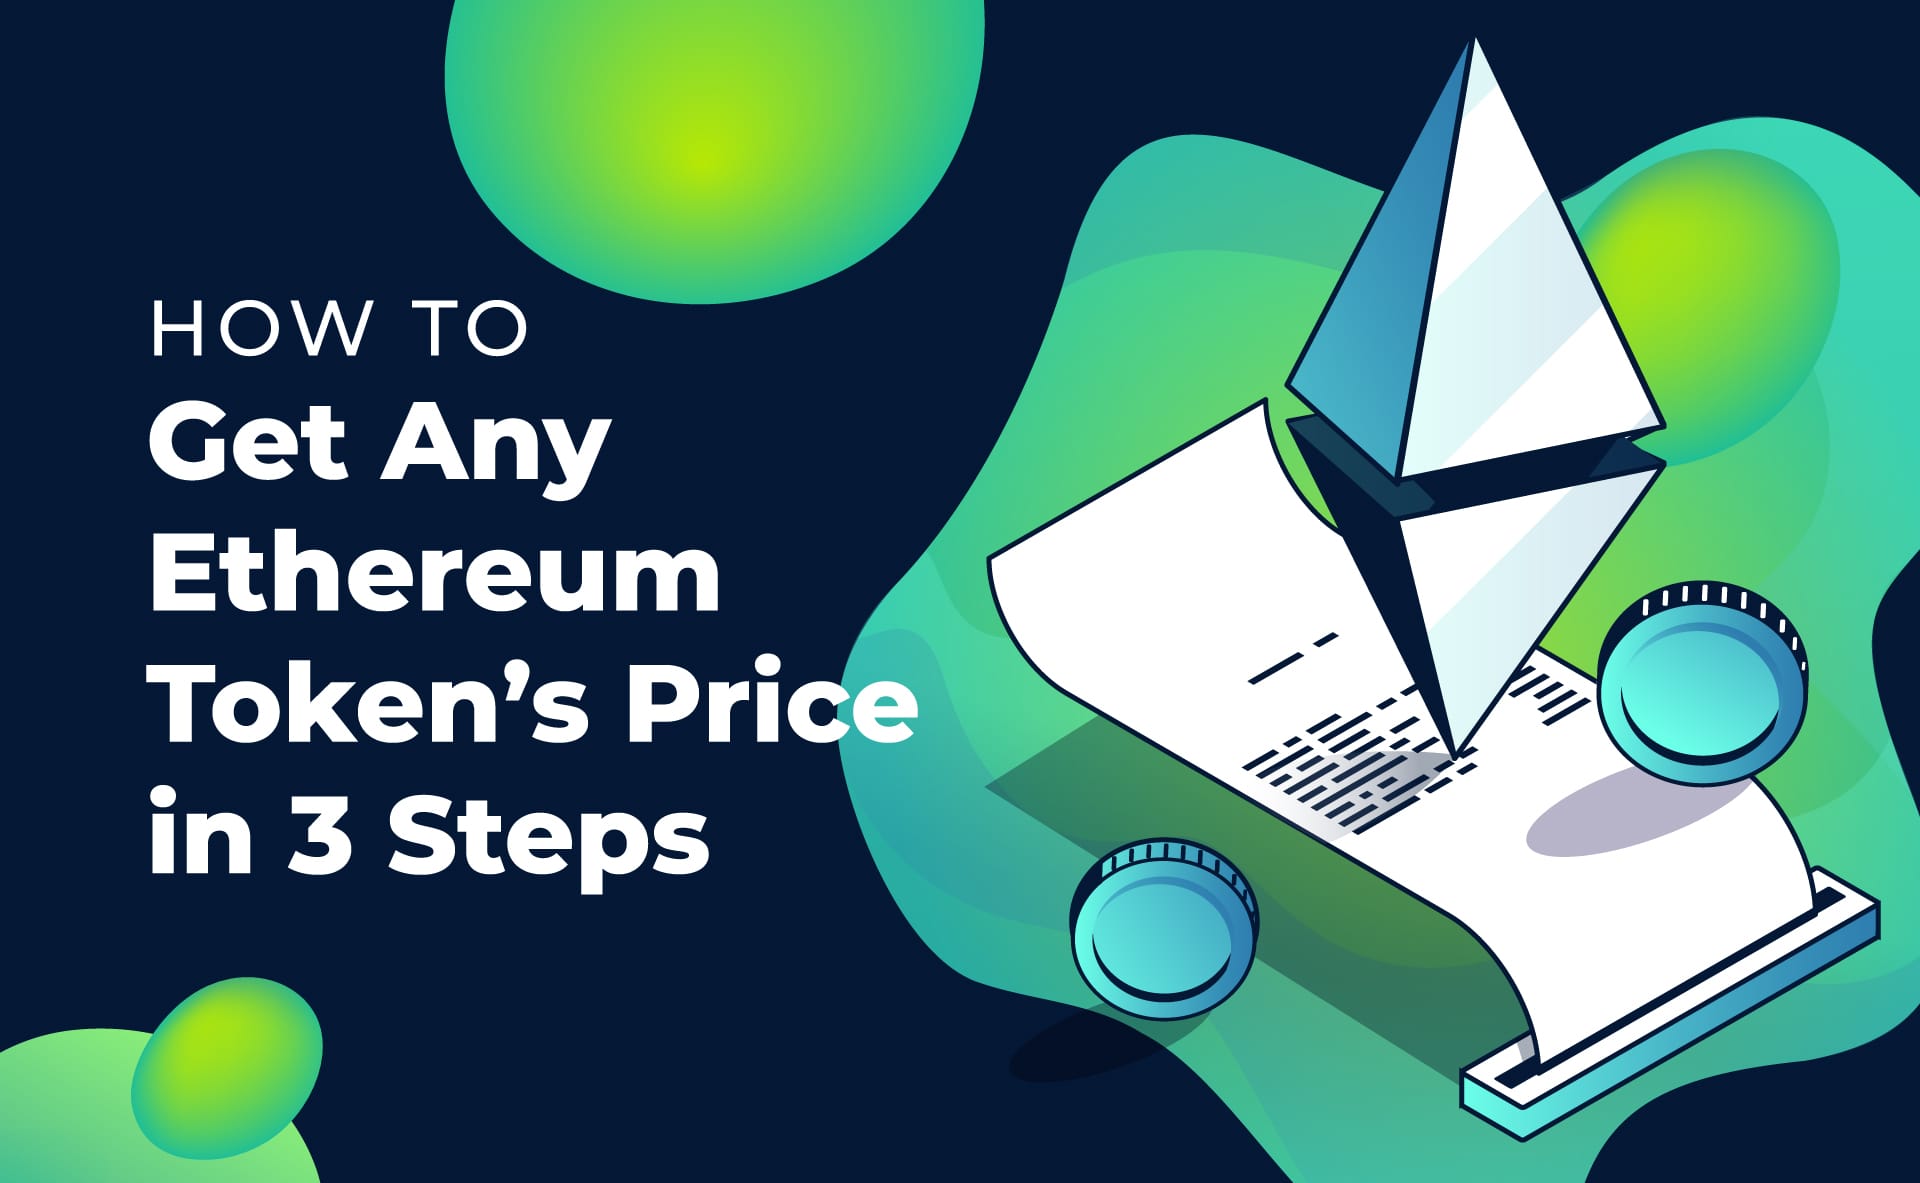 How-to-Get-Any-Ethereum-Tokens-Price-in-3-Steps